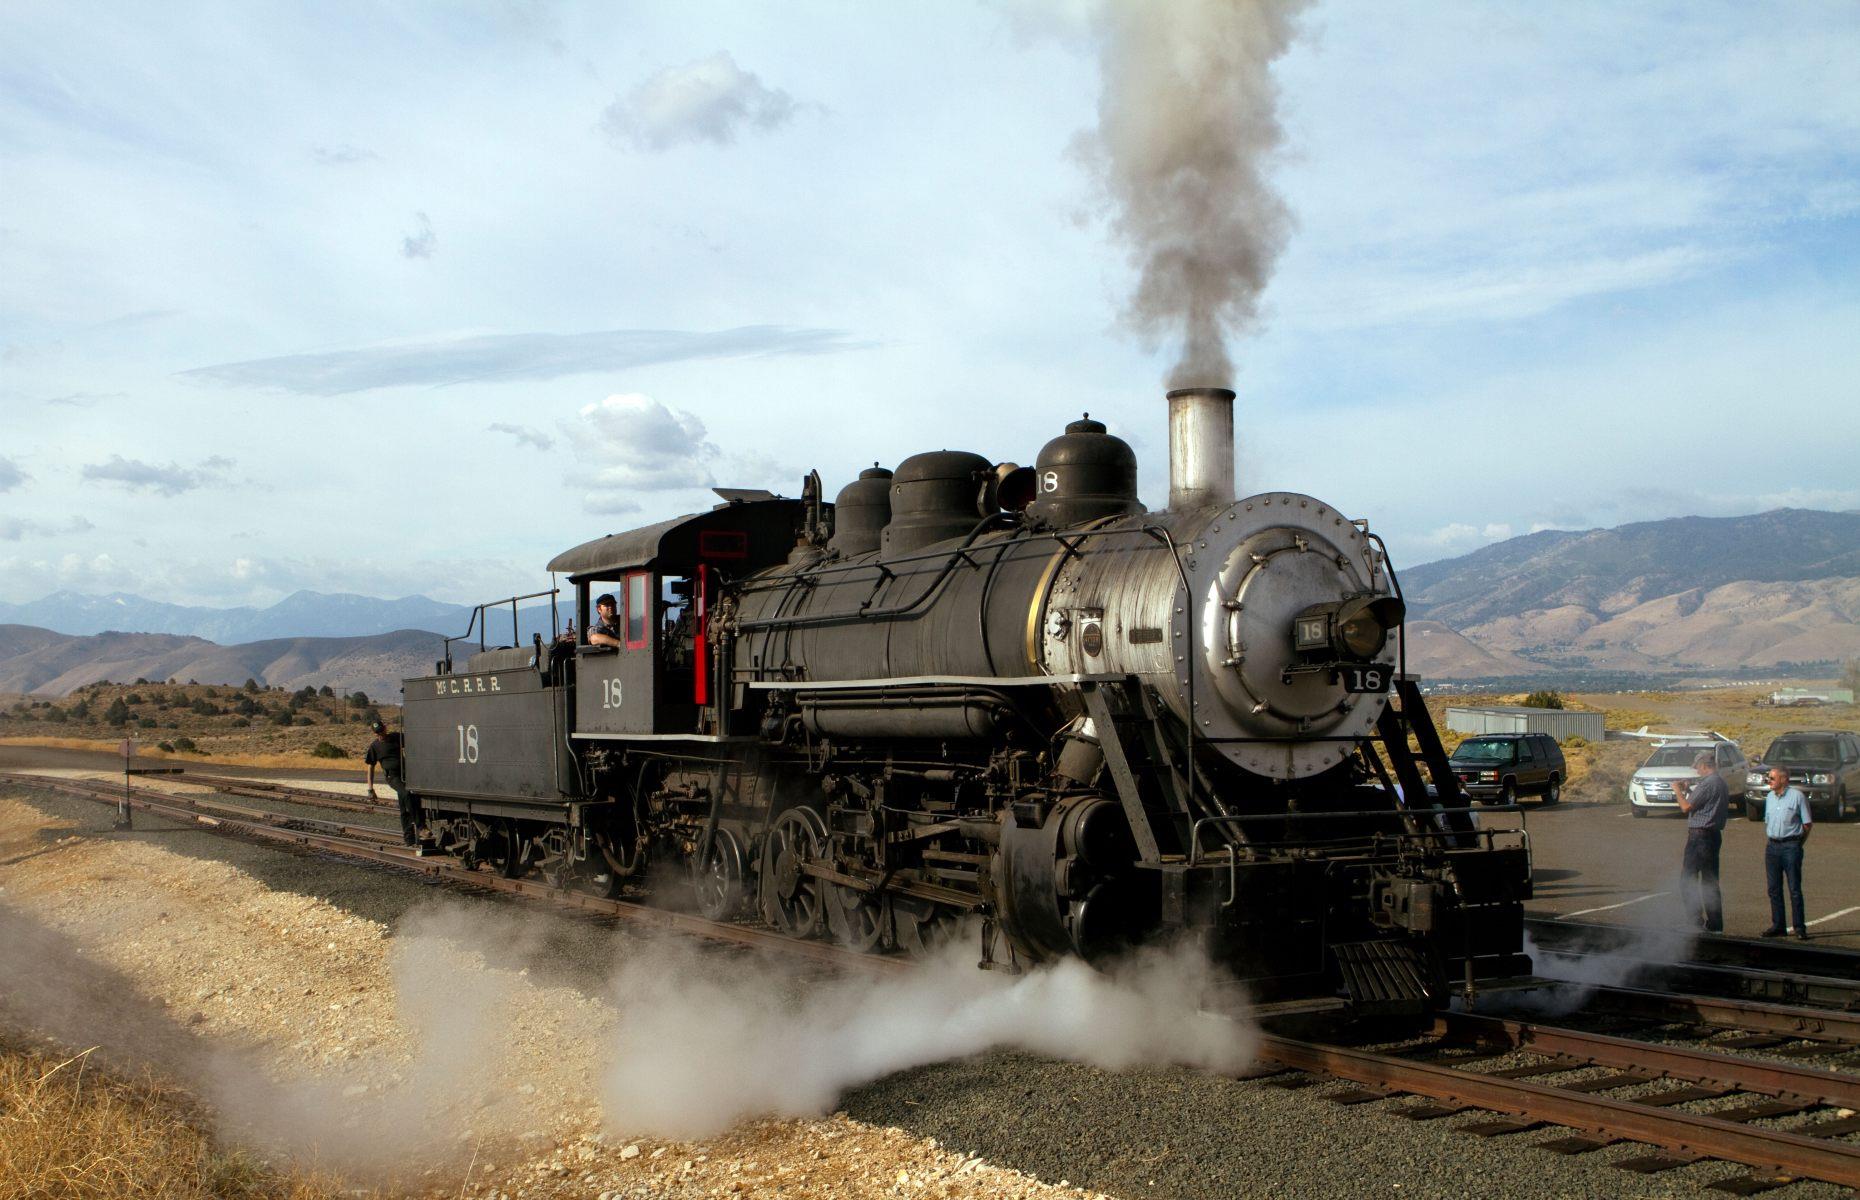 <p>The so-called 'Queen of the Short Lines,' the Virginia and Truckee Railroad whisks passengers back in time on some of the oldest locomotives in the state. The line has been a fixture of Virginia City since 1869; today, century-old steam engines and heritage diesel trains still depart from the original depot.</p>  <p>Passengers can expect to see some of the most famous Comstock mines and ruins en route to Gold Hill, while listening to the conductor’s stories of the region’s legendary silver rush. Wild horses and raptors call these ranges home, so keep your eyes peeled.</p>